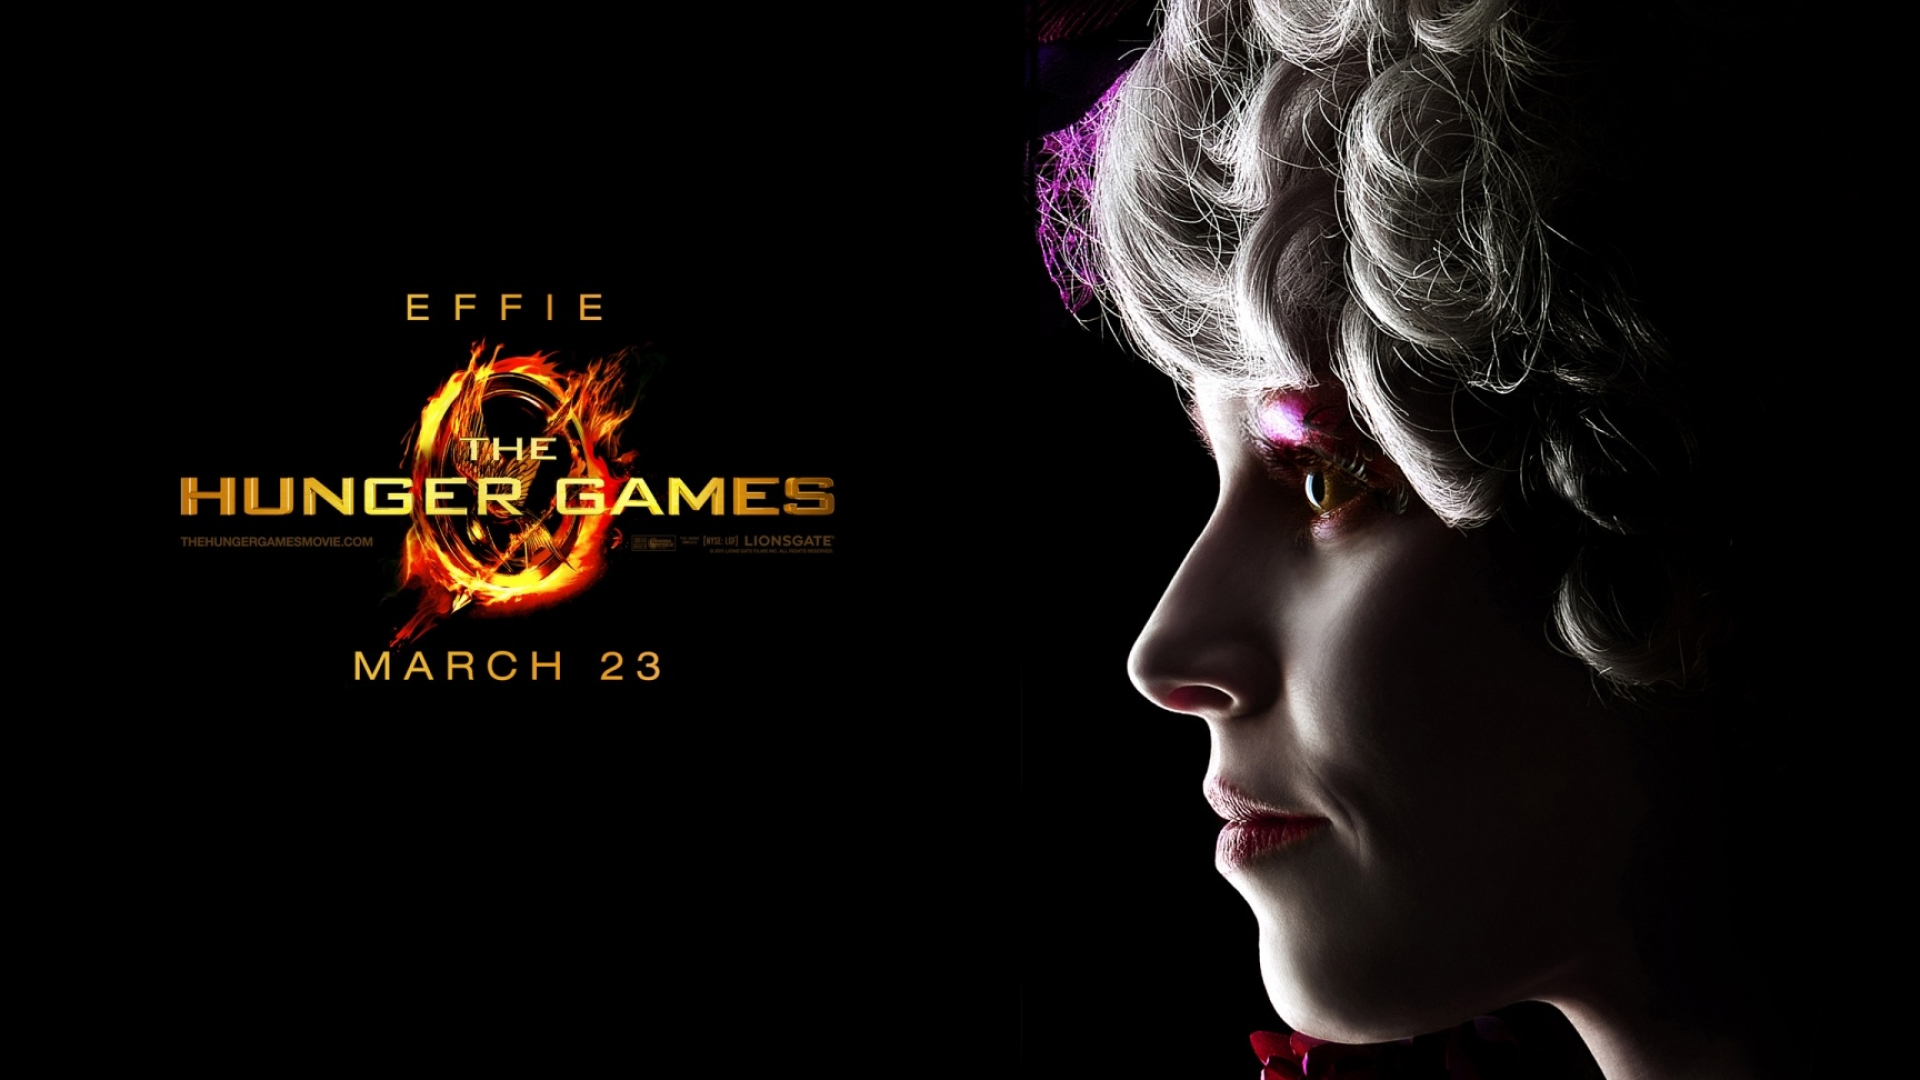 Hunger Games: Effie Trinket, a Capitol-born chaperone who was assigned to oversee District 12's tributes. 1920x1080 Full HD Wallpaper.